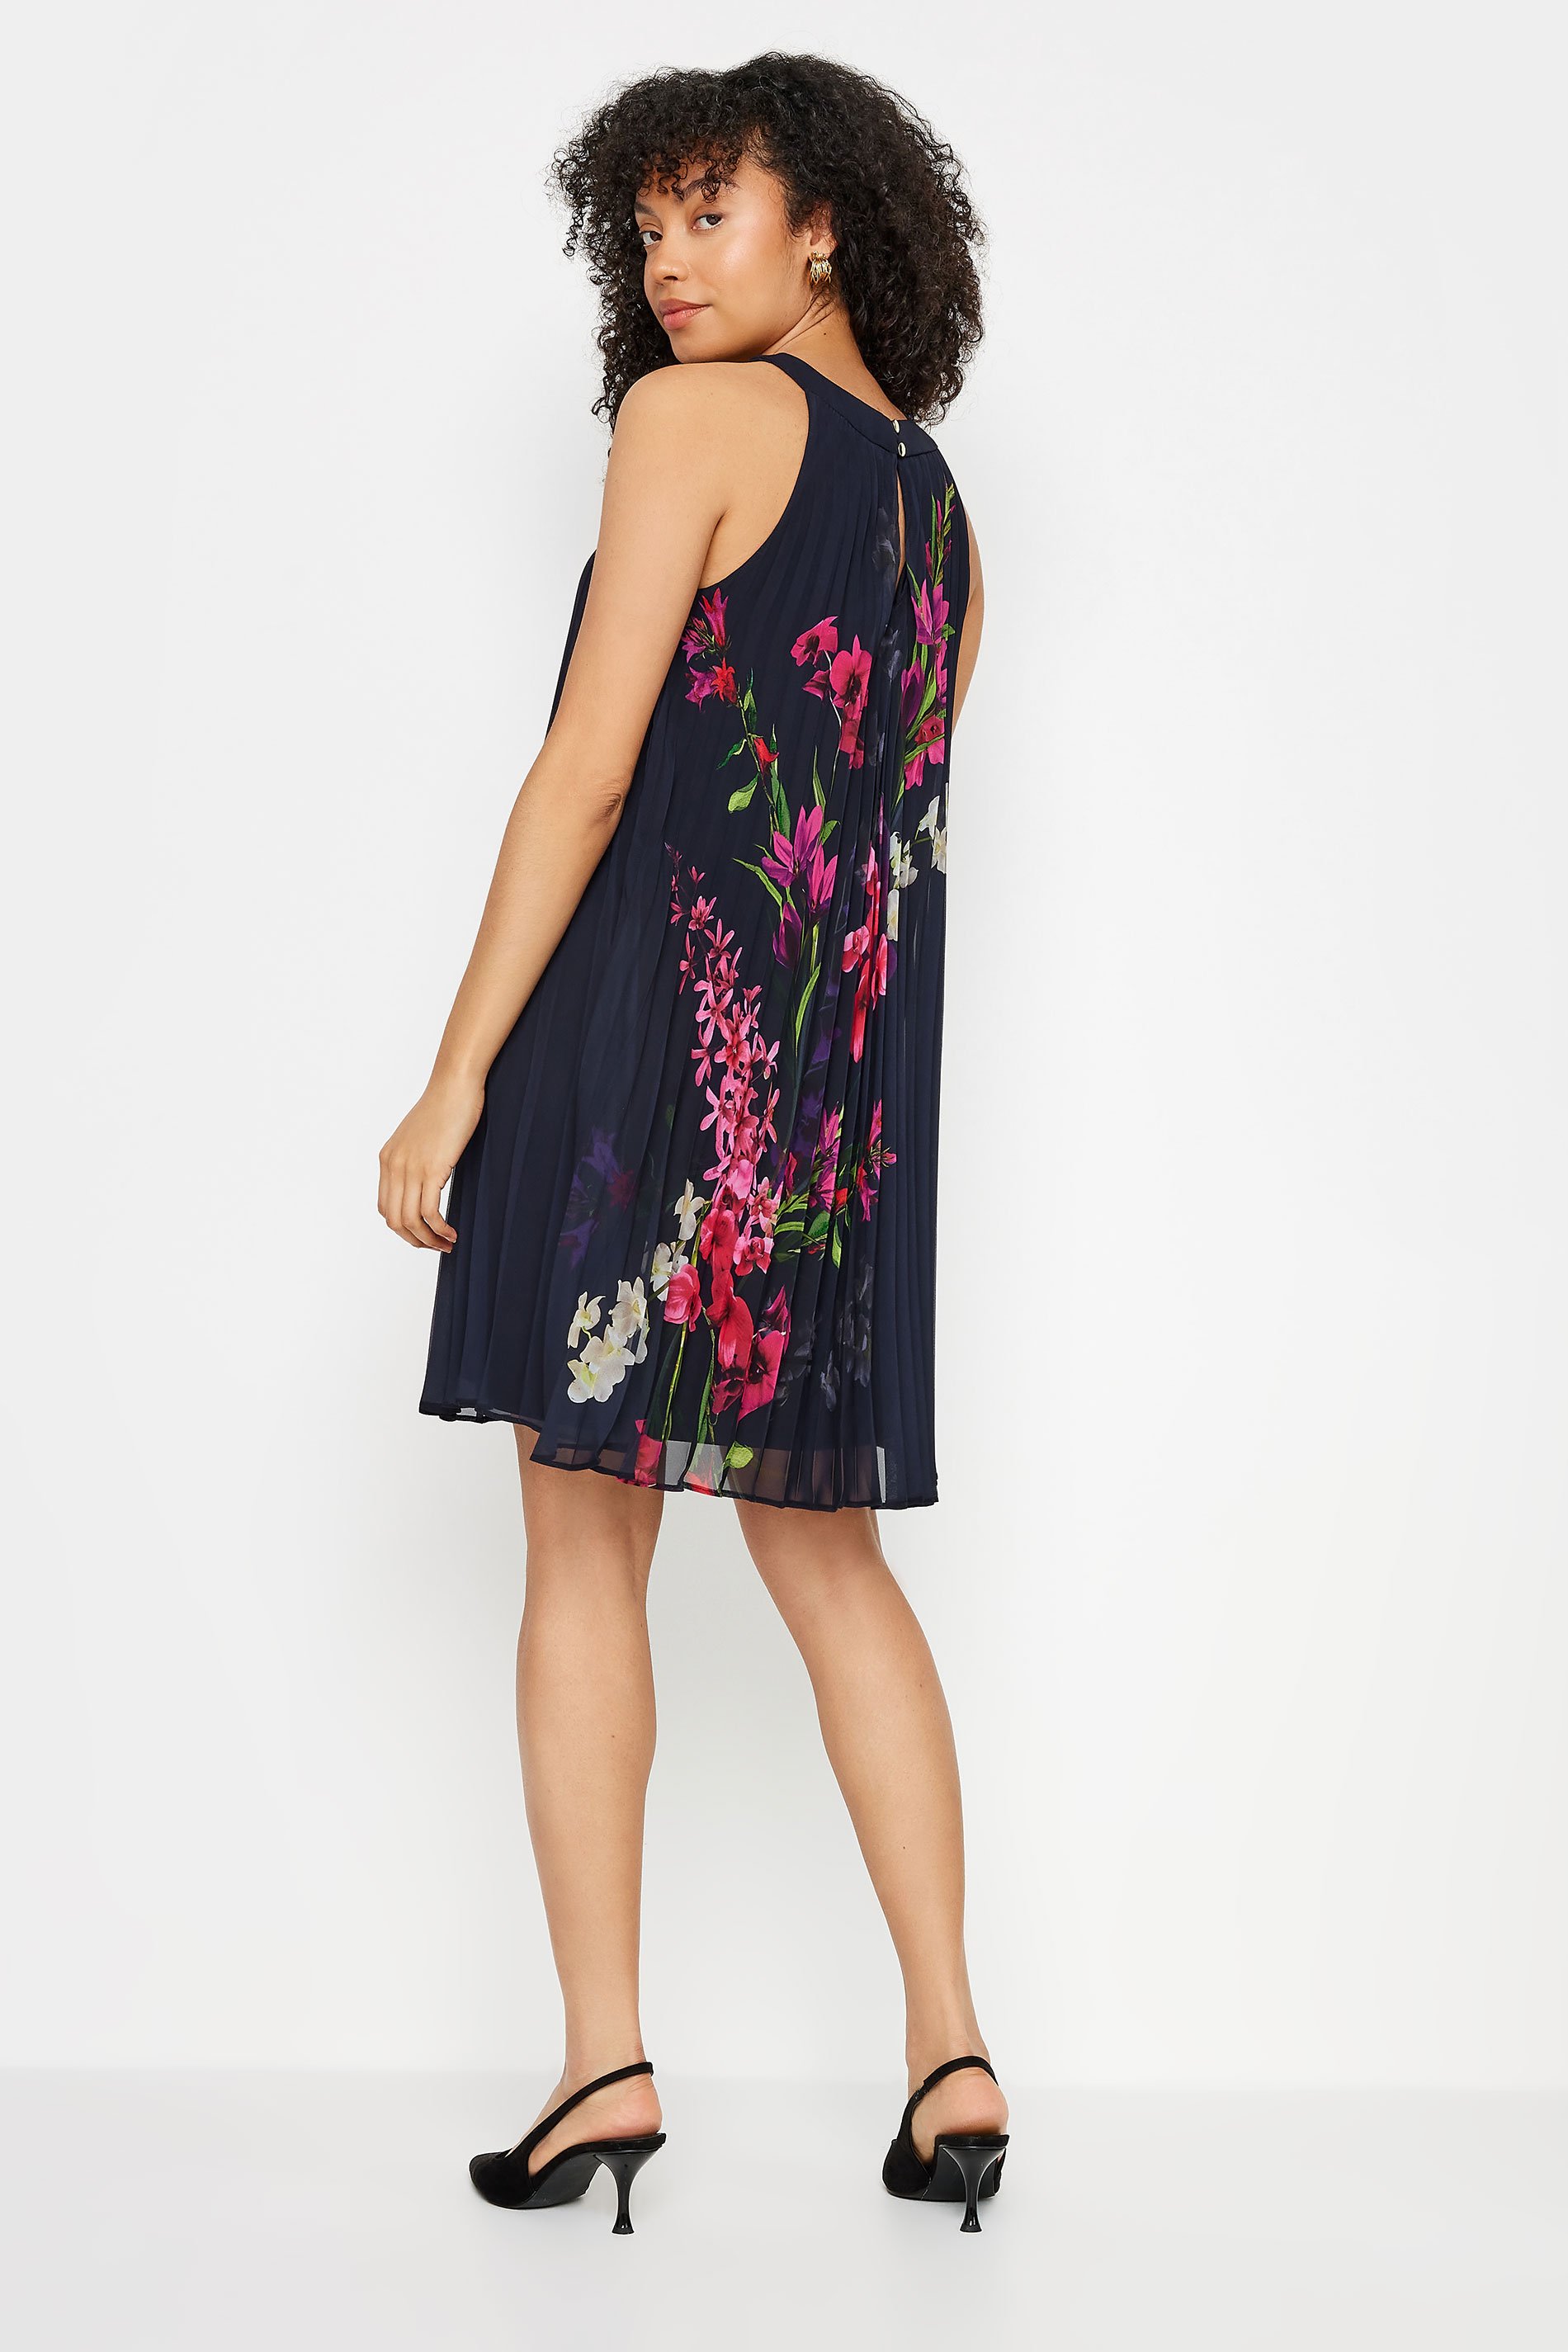 M&Co Navy Blue Floral Print Pleated Dress | M&Co 3